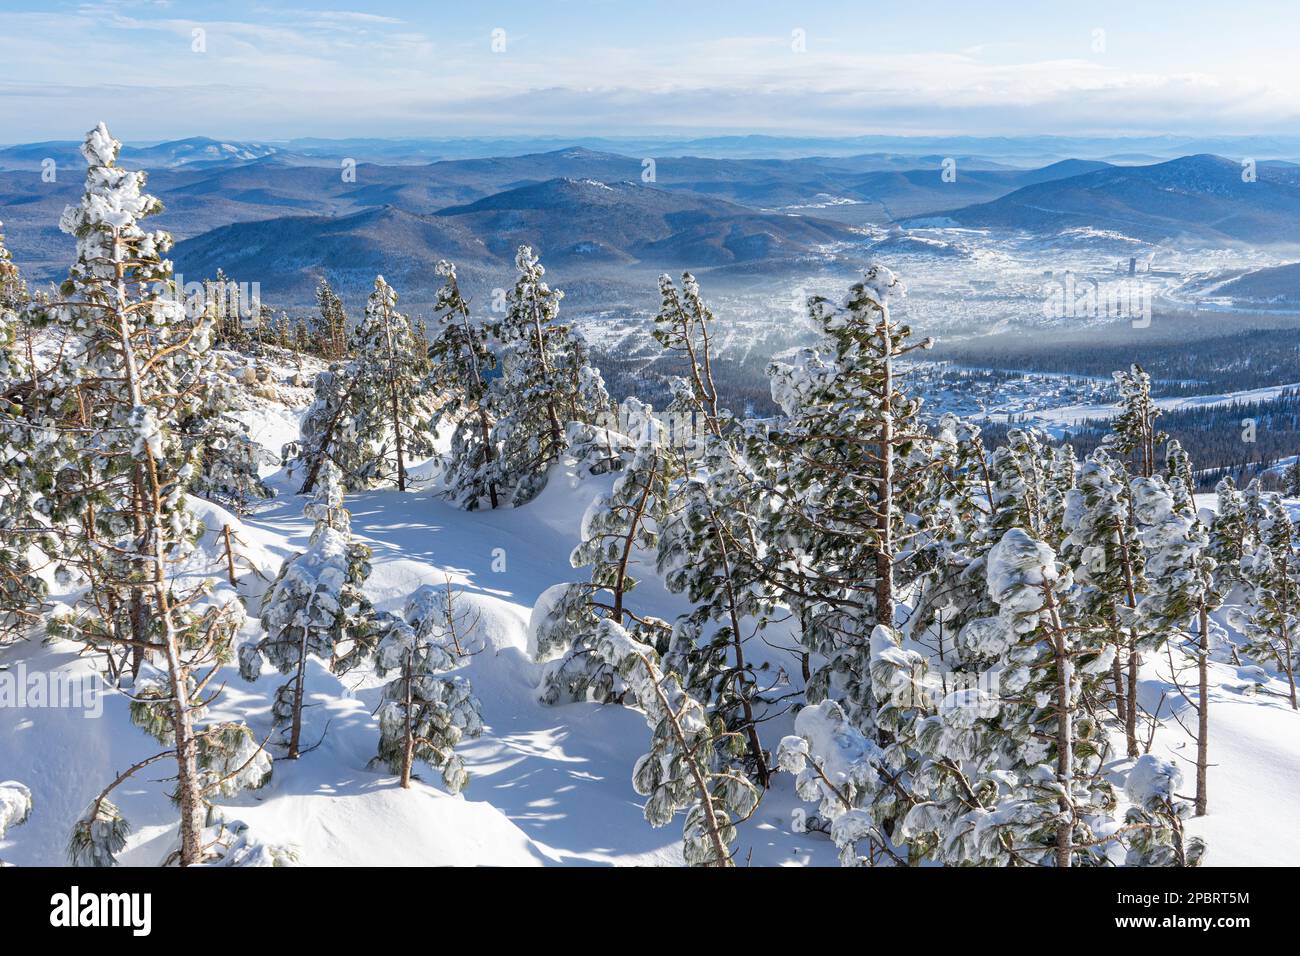 Dwarf coniferous trees in the snow, on top of a high mountain. View of the hills and the village in the distance. Stock Photo